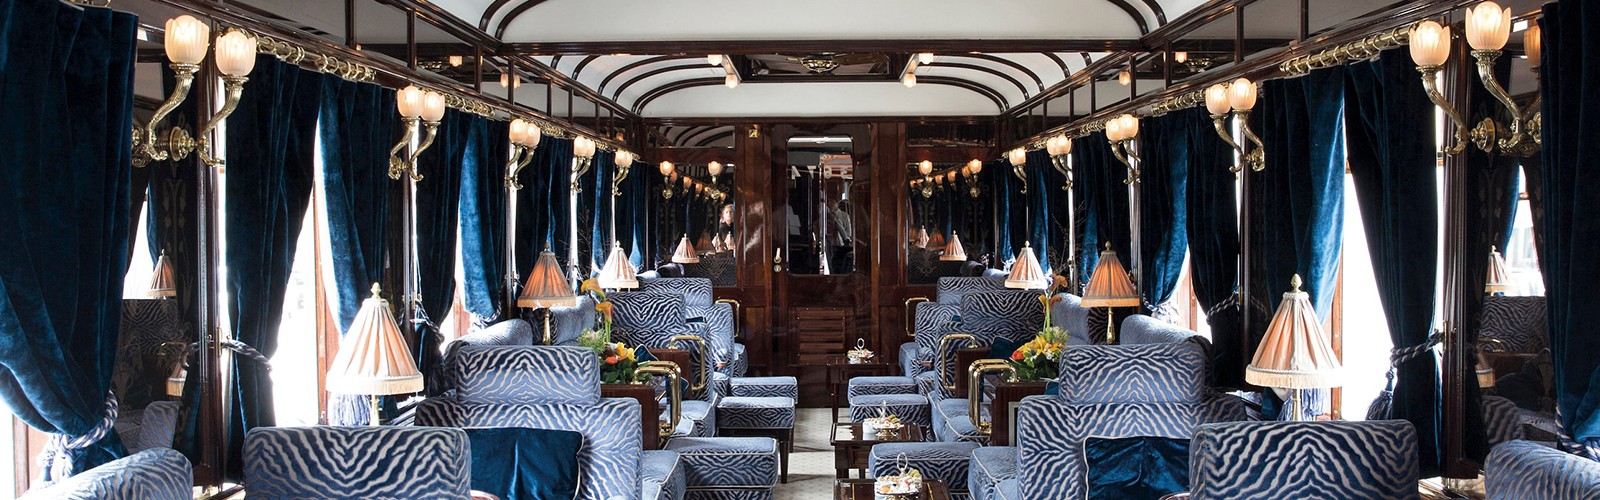 orient express 1 day trips